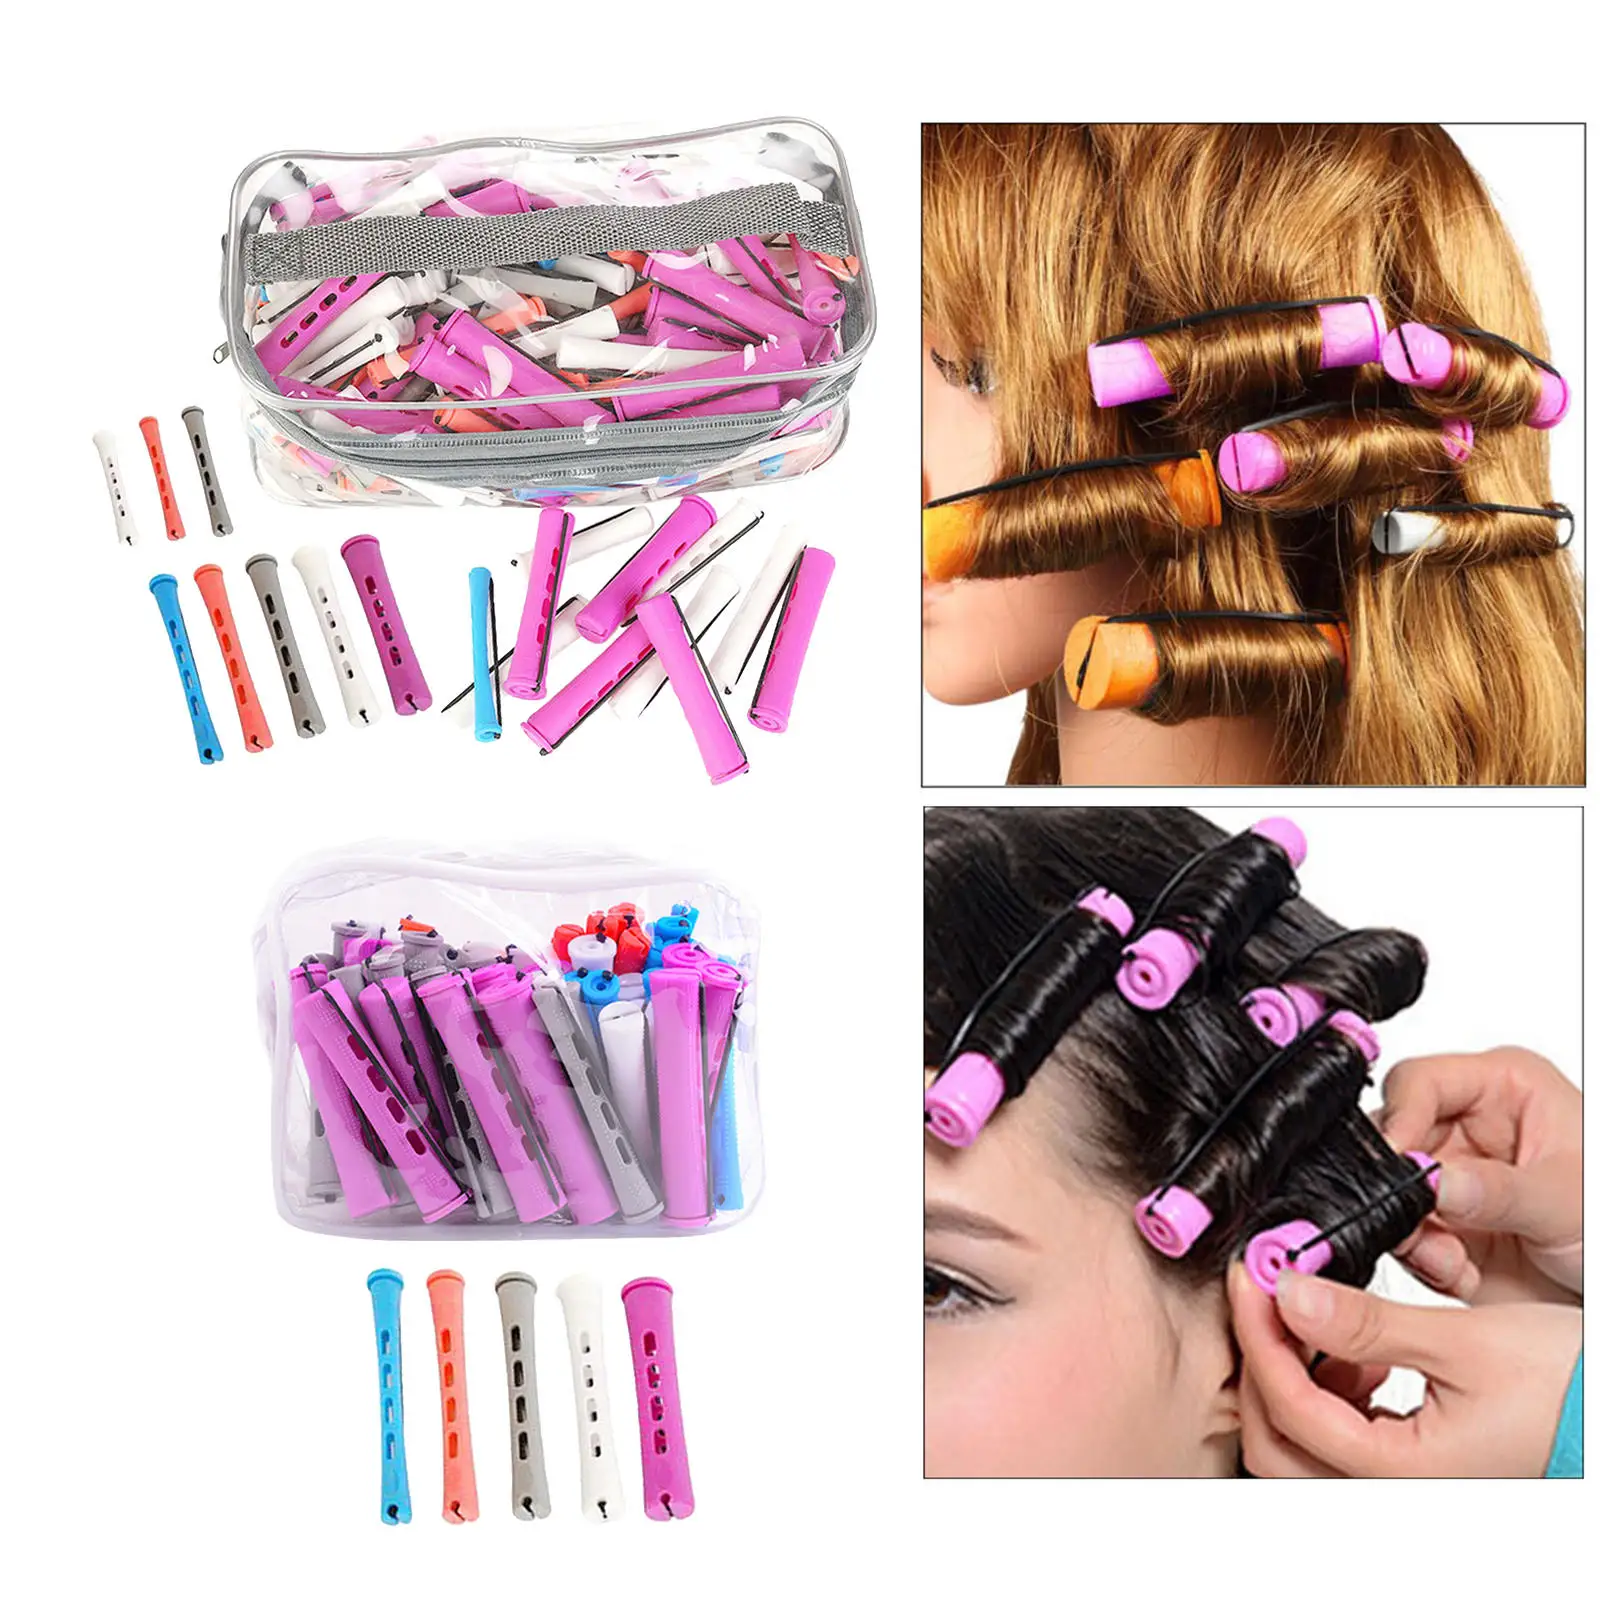 Hair Rollers with Rubber Band Small Medium Large Size No Heat Perm Rods Perming Curlers Curly Wavy Rod for Long Short Hair Set